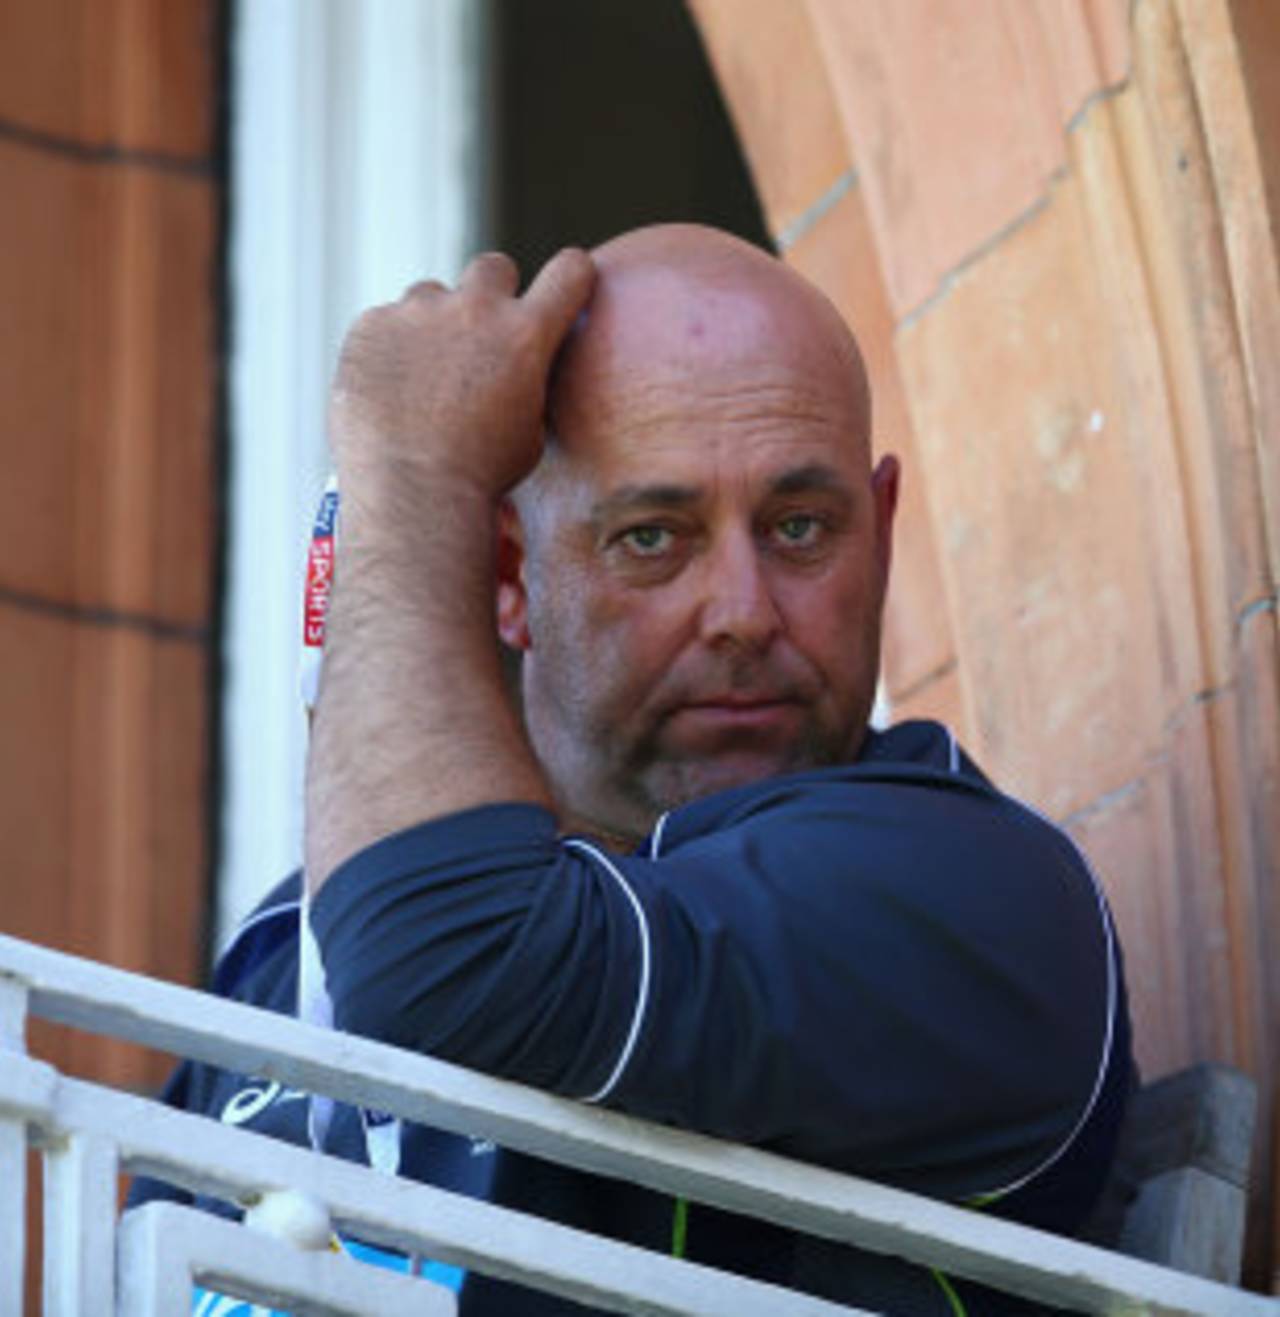 Tough job: Darren Lehmann watches Australia's performance, England v Australia, 2nd Investec Ashes Test, Lord's, 2nd day, July 19, 2013